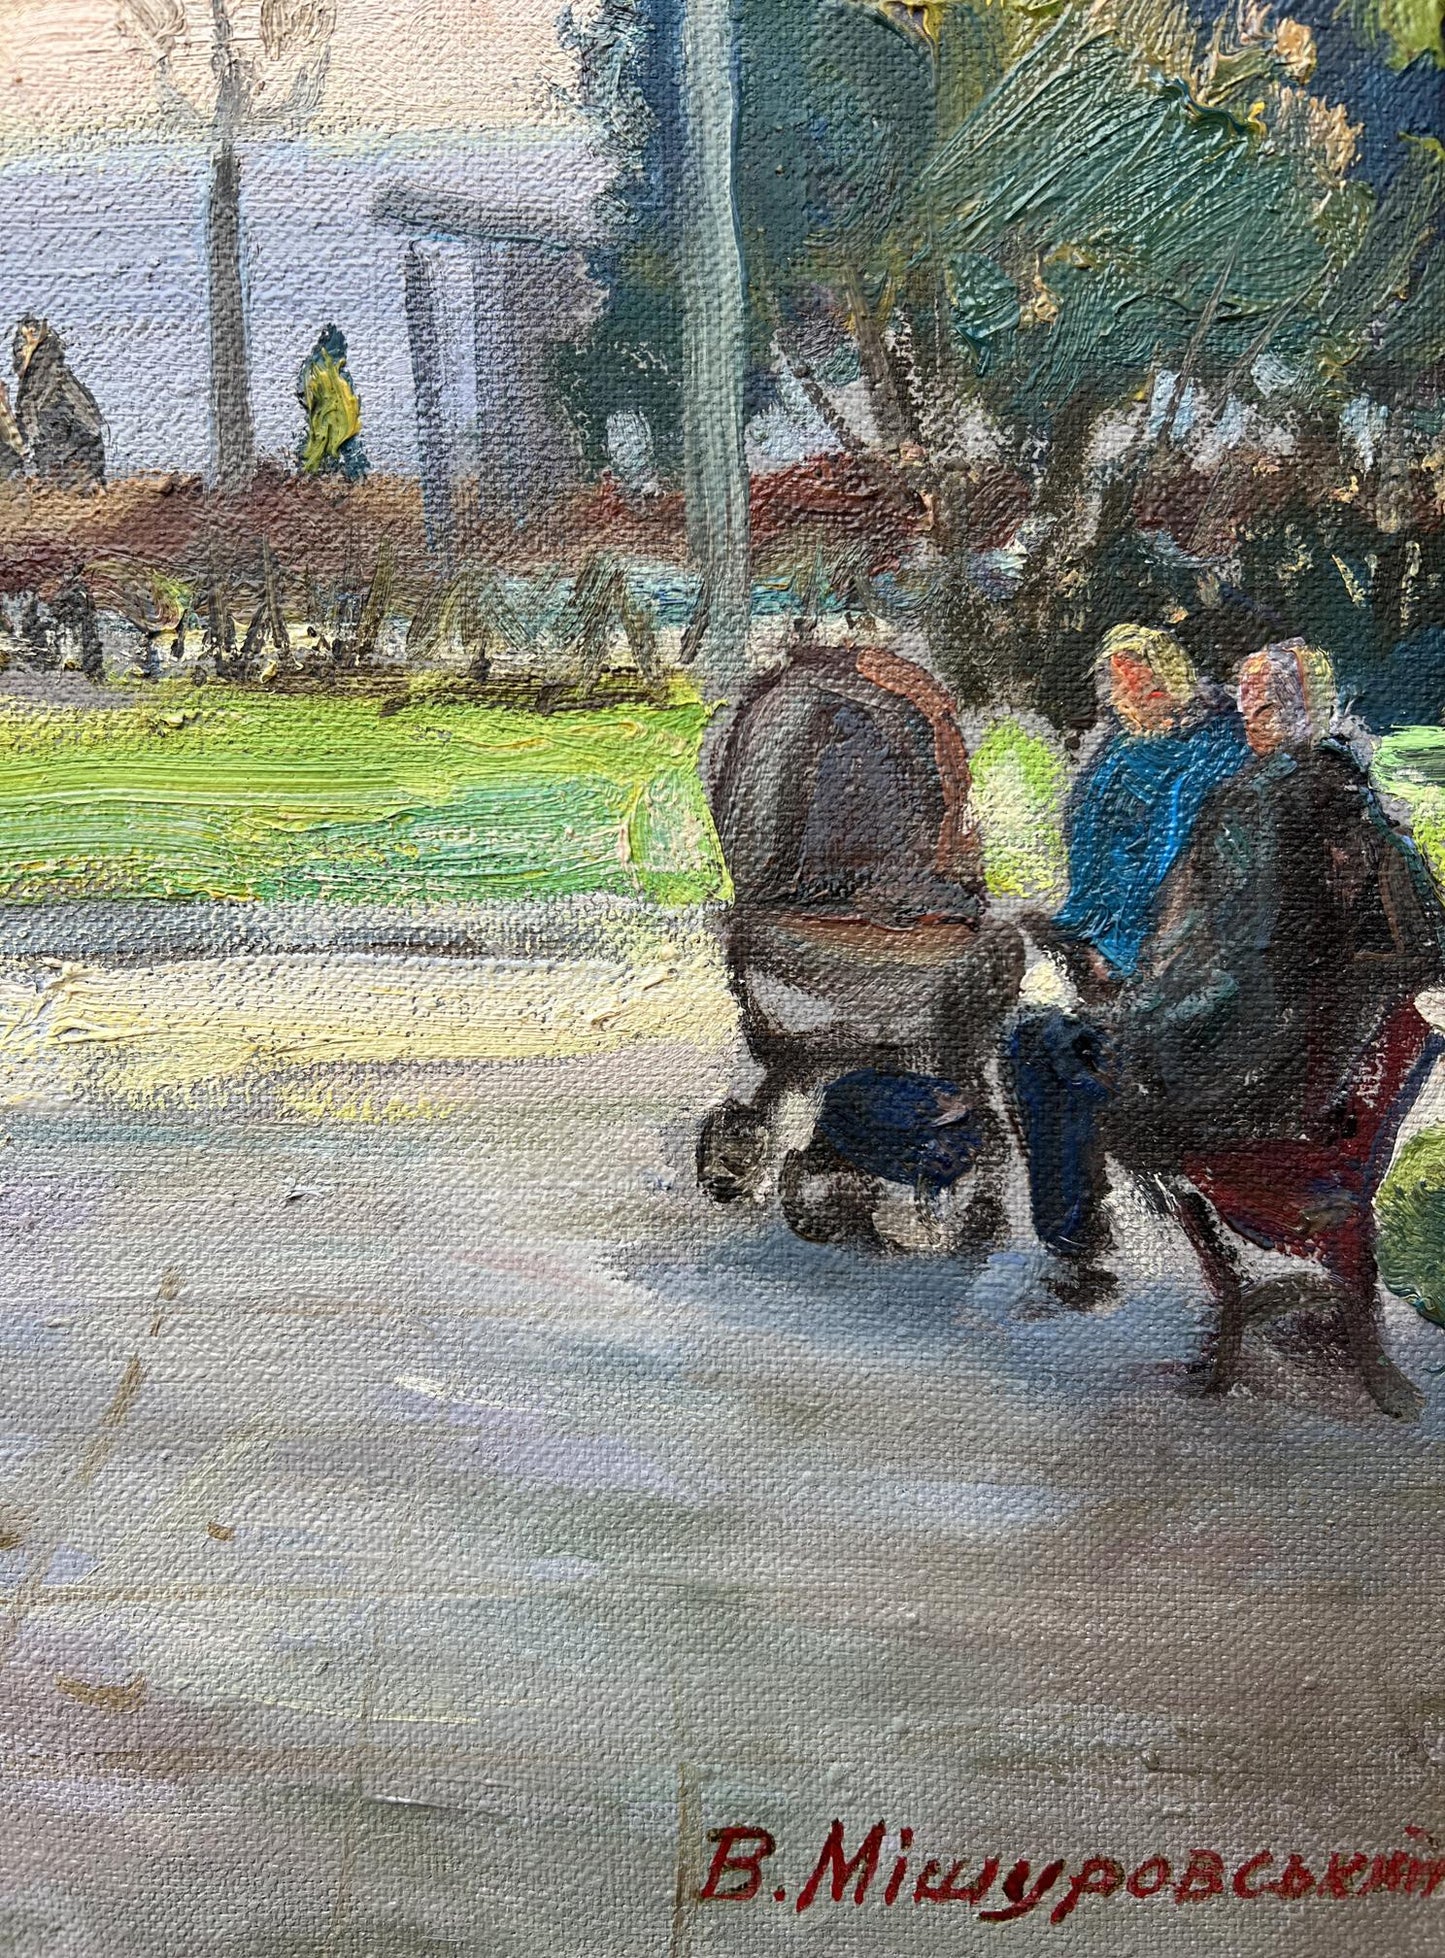 Oil painting A warm day V. Mishurovsky